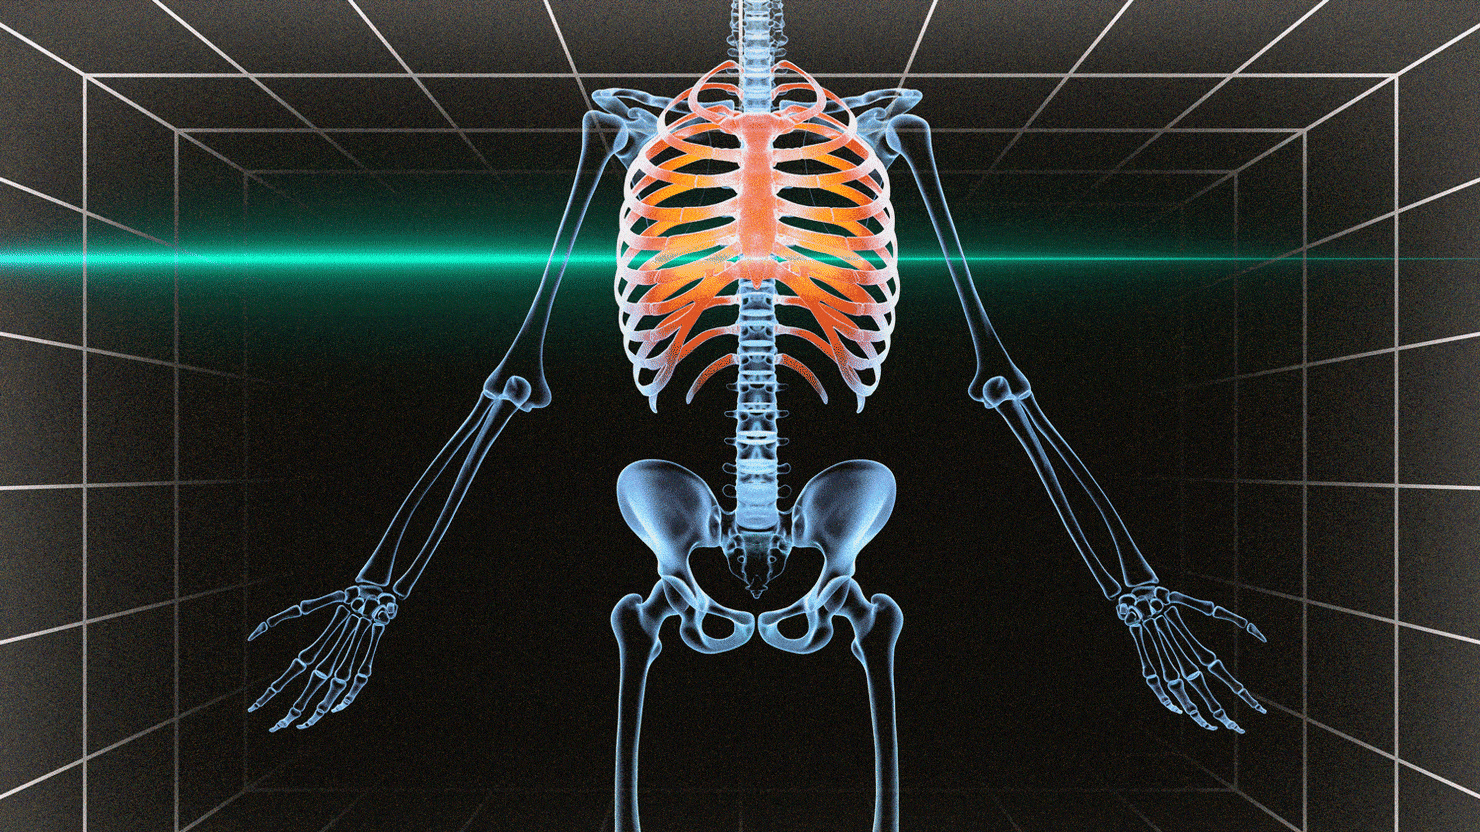 This 3D Printer Works In Your Body to Repair Bones and Guts